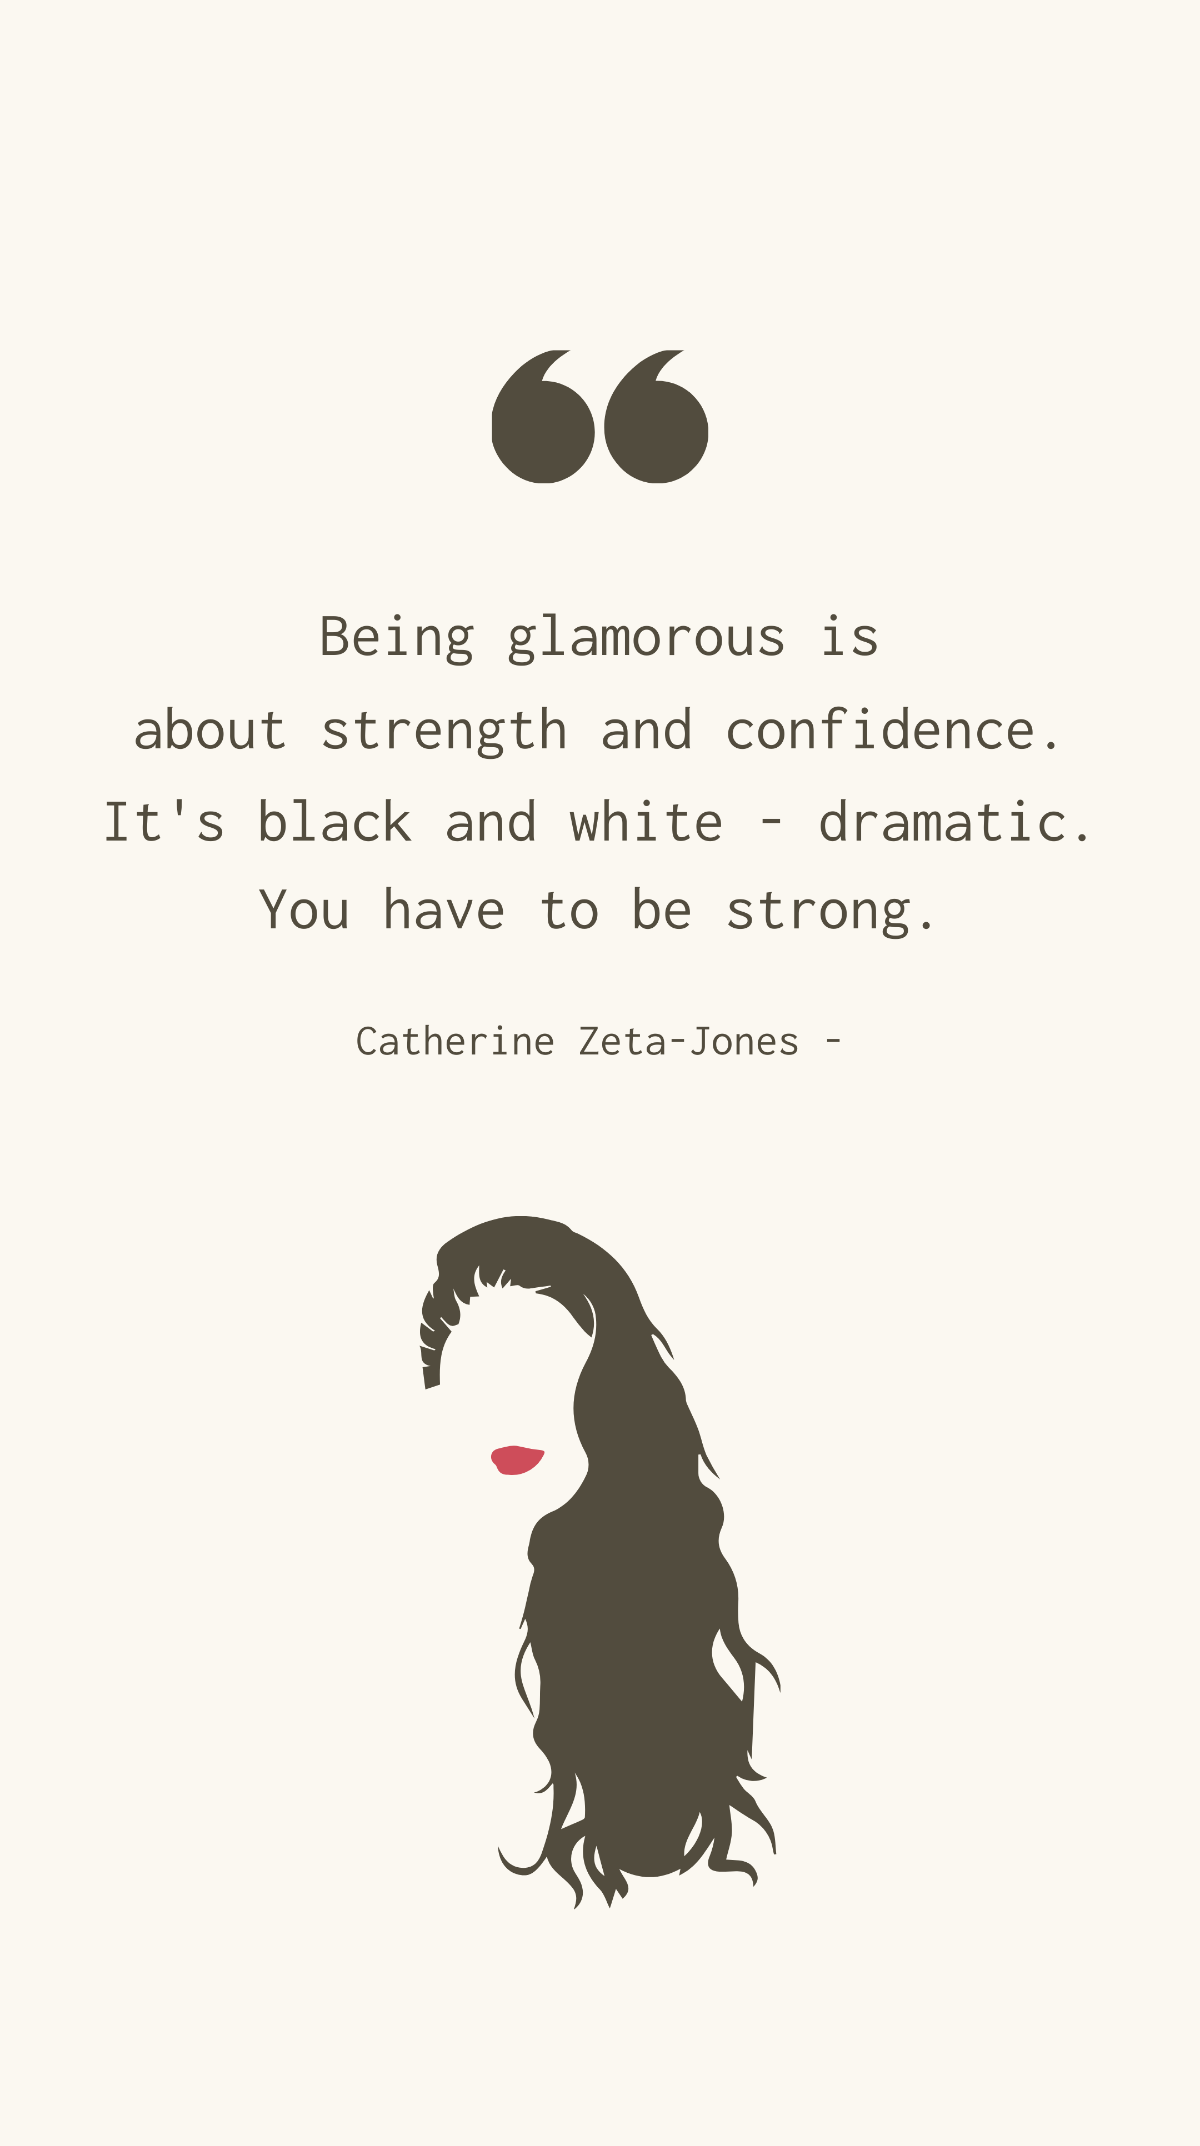 Free Catherine Zeta-Jones - Being glamorous is about strength and confidence. It's black and white - dramatic. You have to be strong. Template